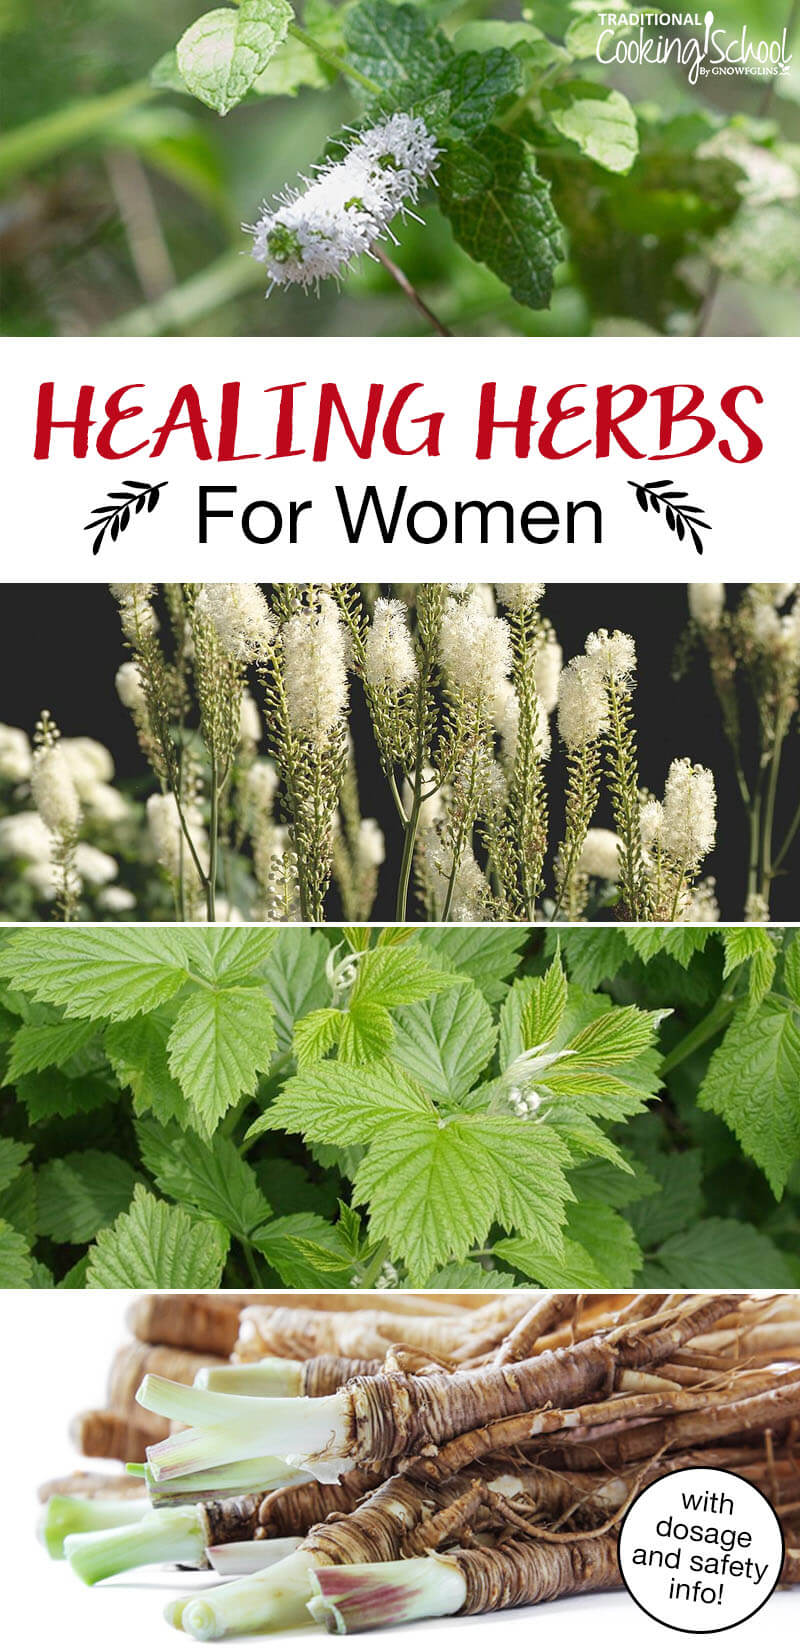 Photo collage of herbs, including black cohosh, red raspberry leaf, and dong quai. Text overlay says: "Healing Herbs For Women (with dosage and safety info!)"